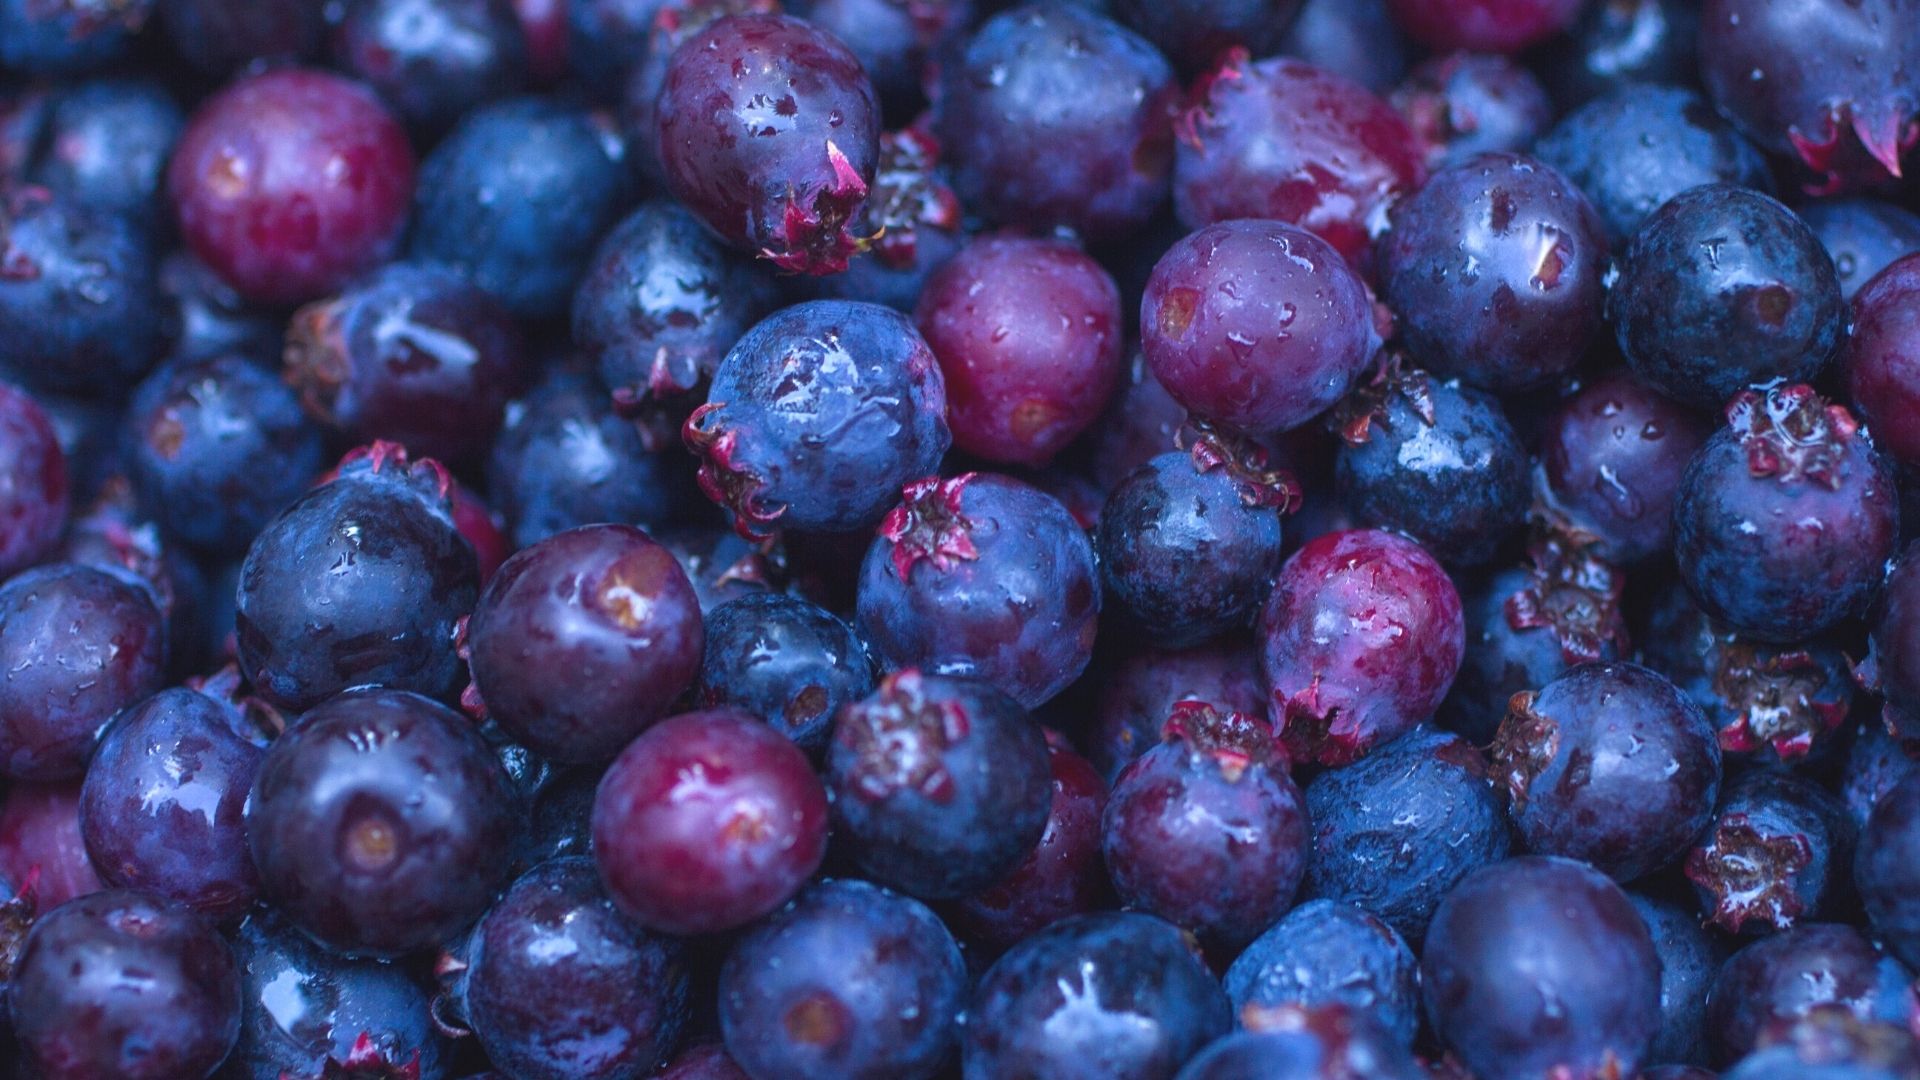 closeup visual of a whole bunch of freshly washed huckleberries